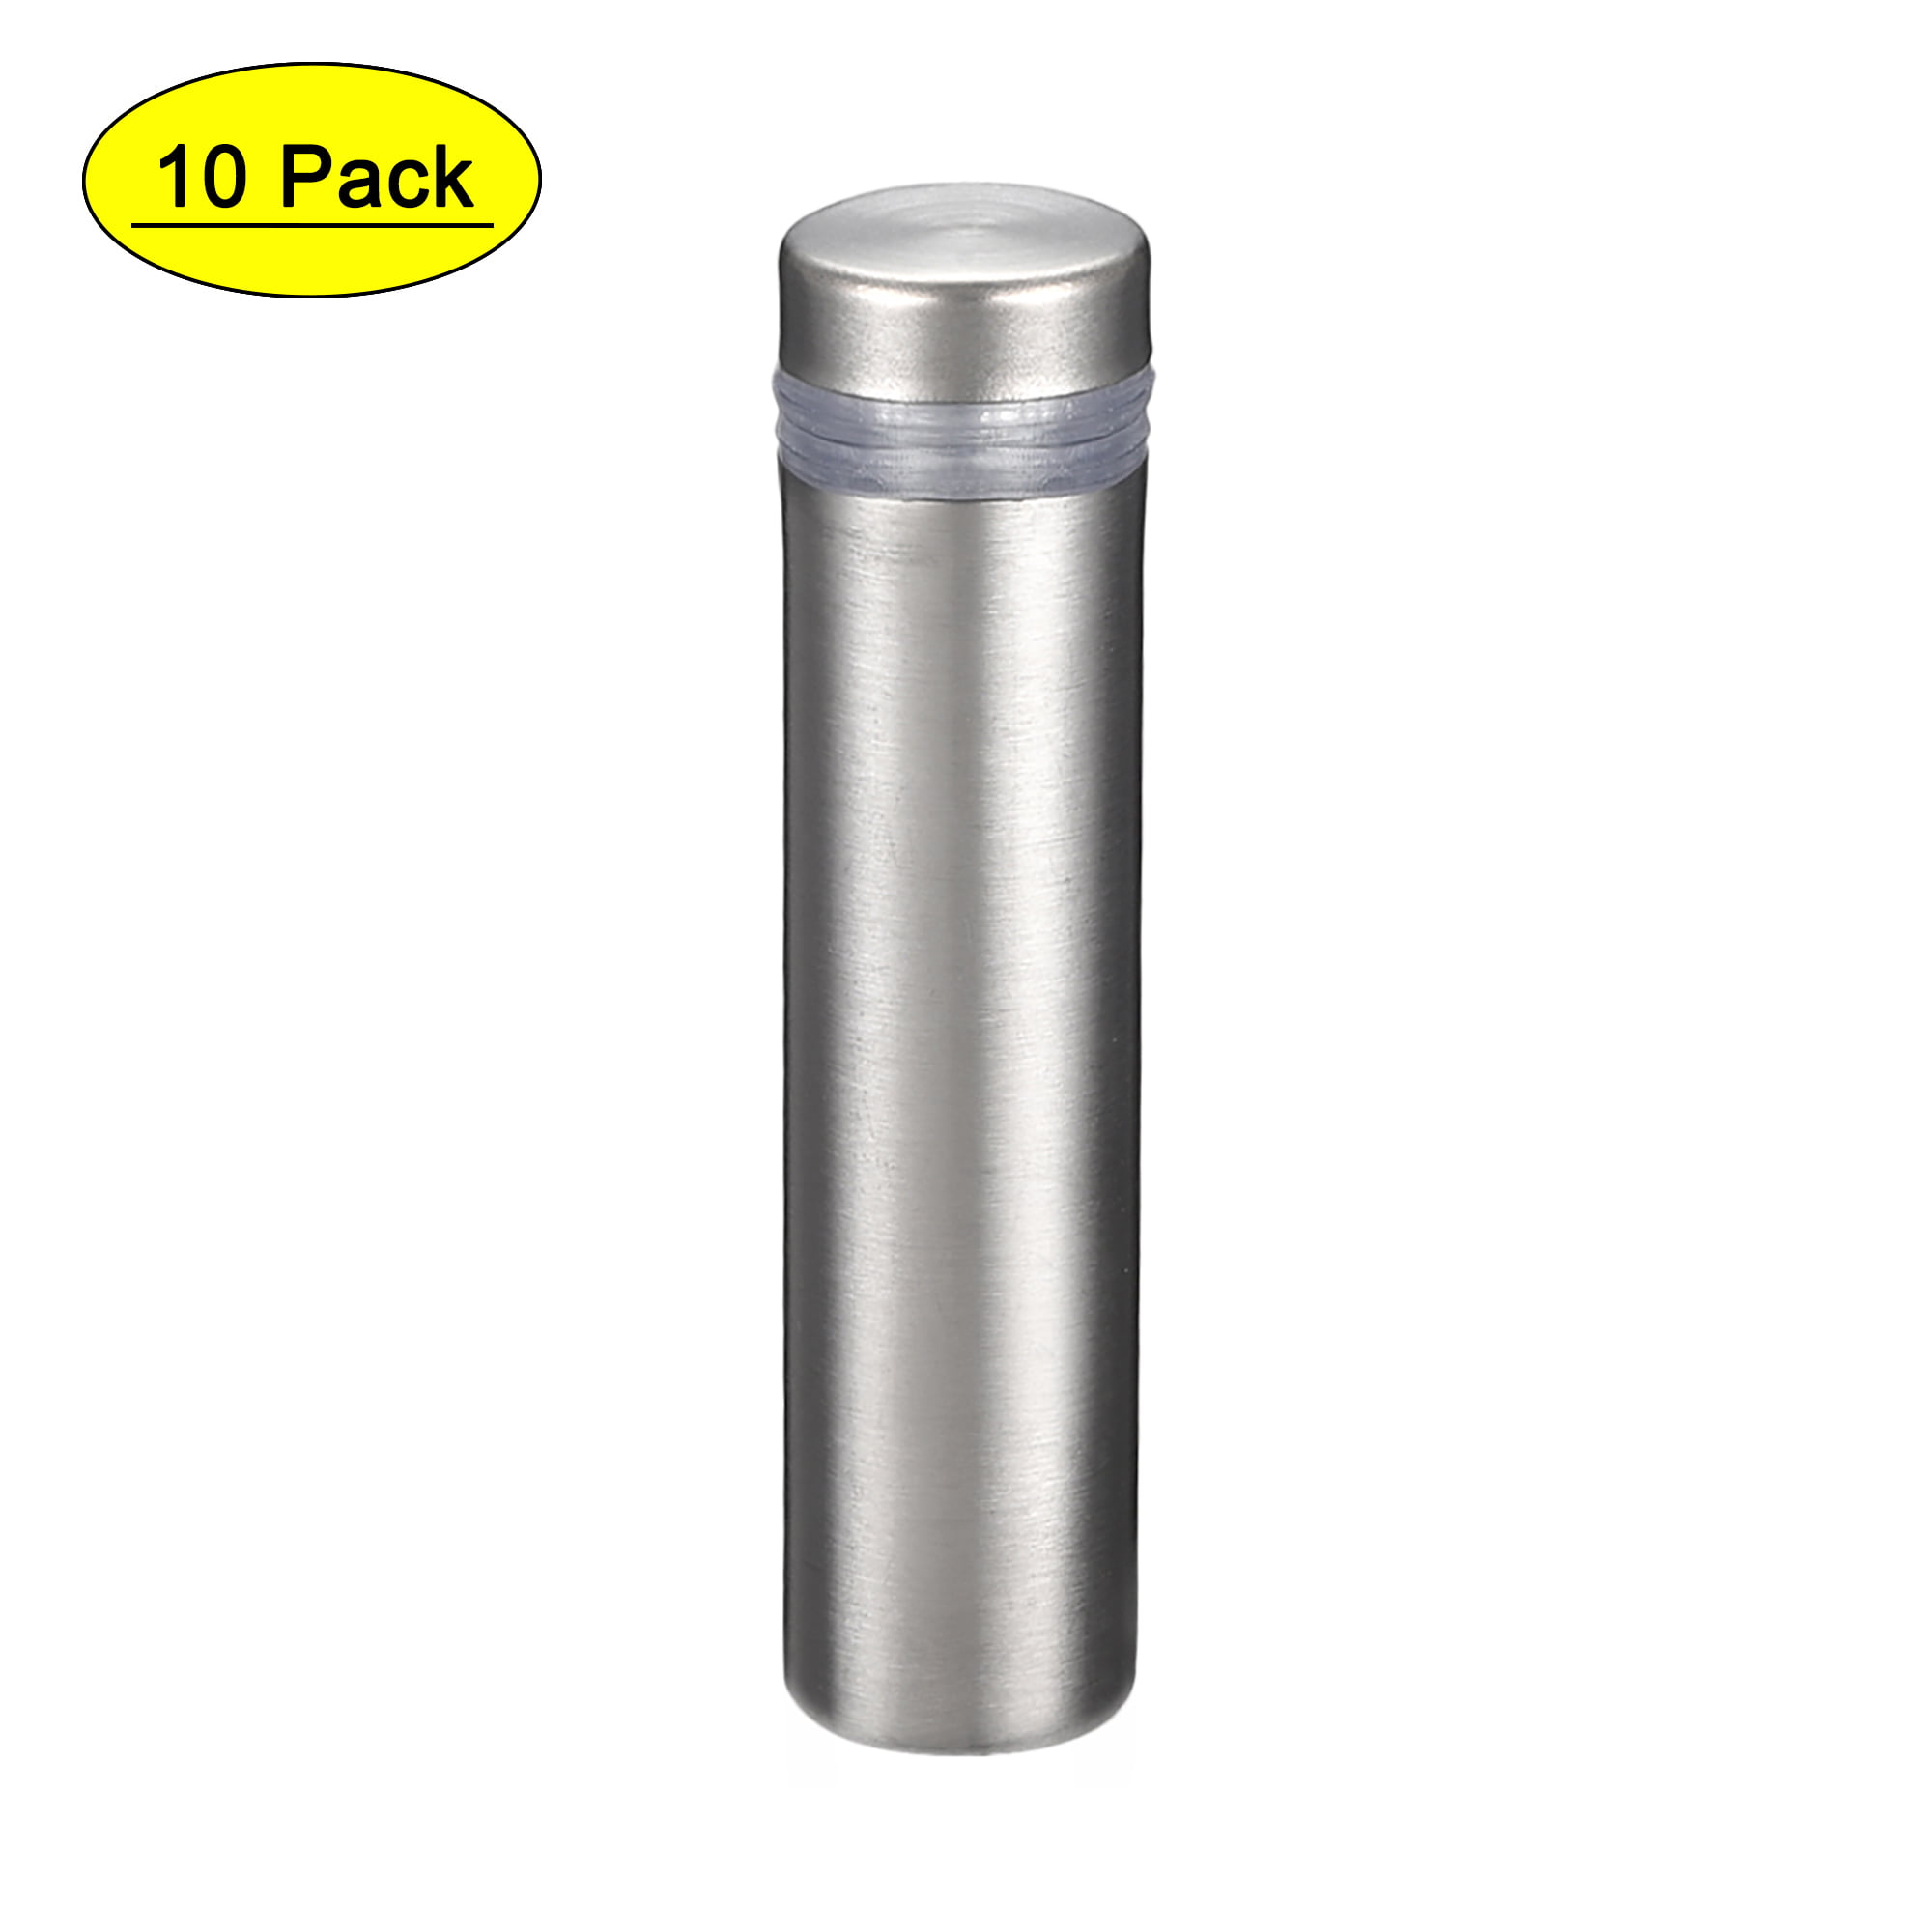 Uxcell 0.47''x3.15'' Standoff Screws Stainless Steel 10 Pack